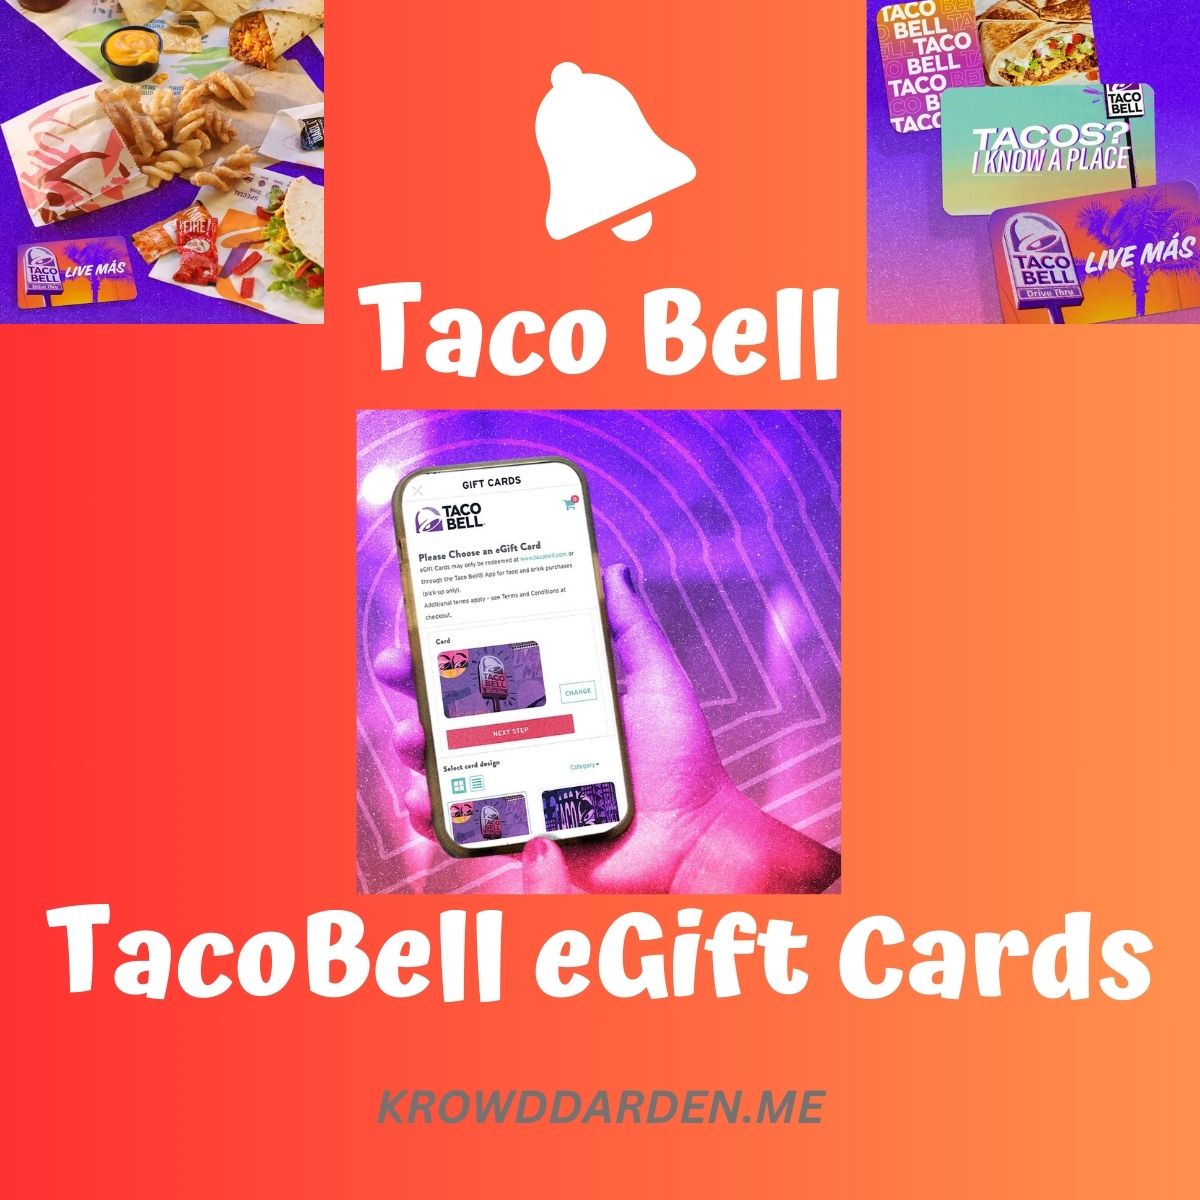 taco bell coupons | taco bell menu | taco bell menu prices | taco bell specials